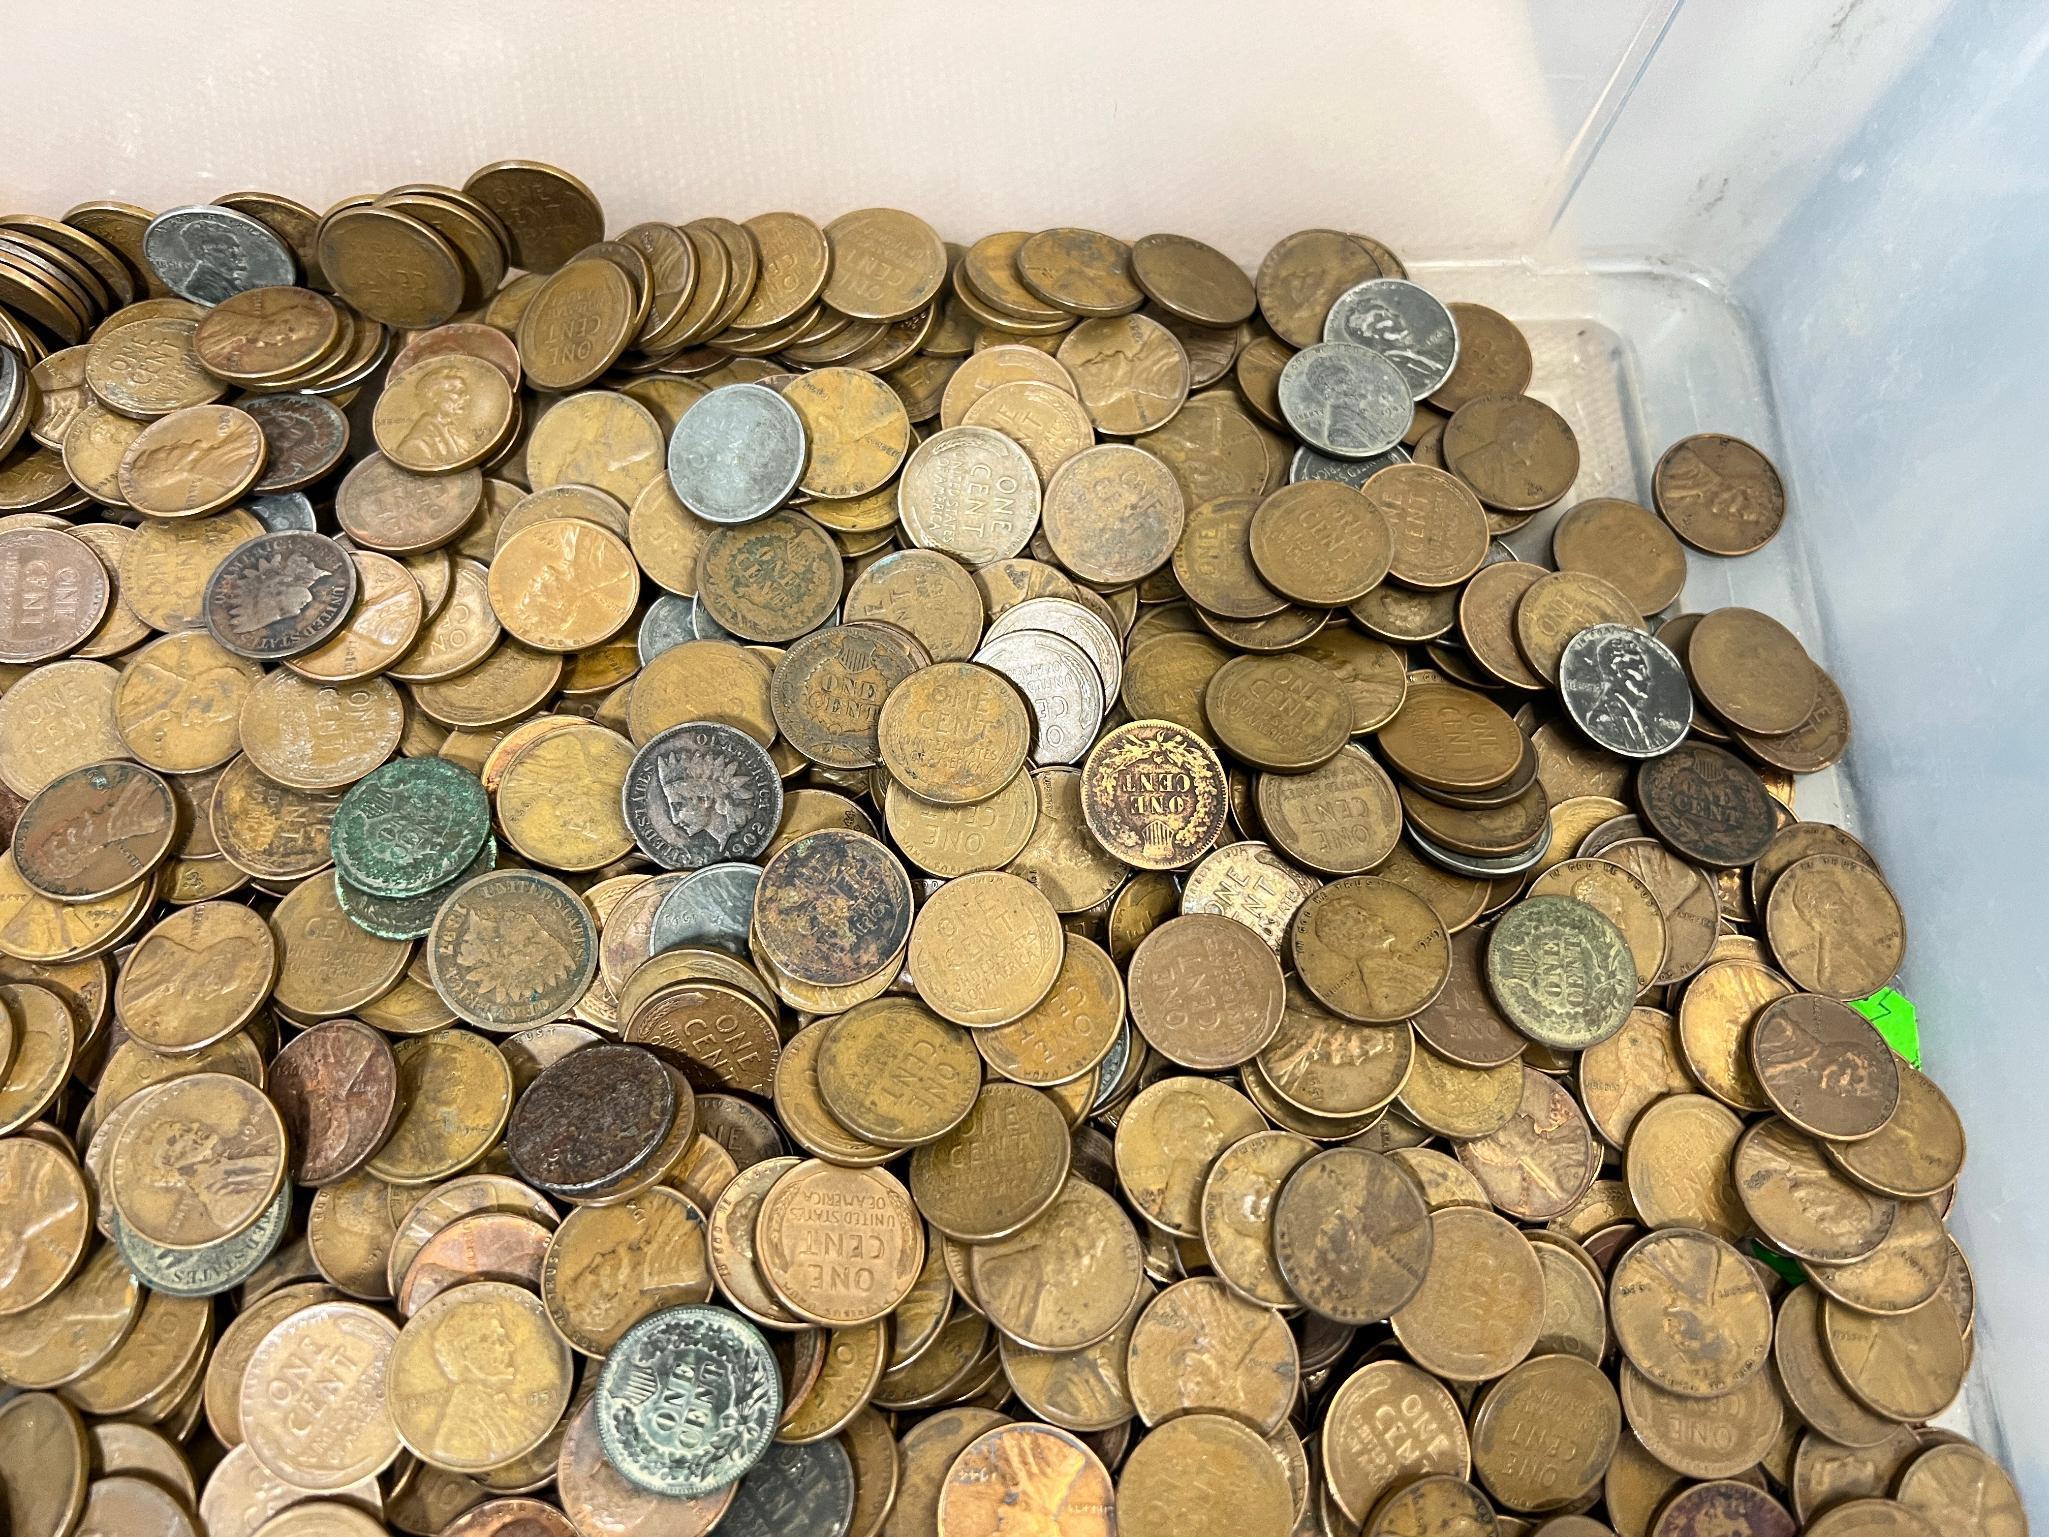 25+ pounds of Wheat cents w/ some Indianhead cents